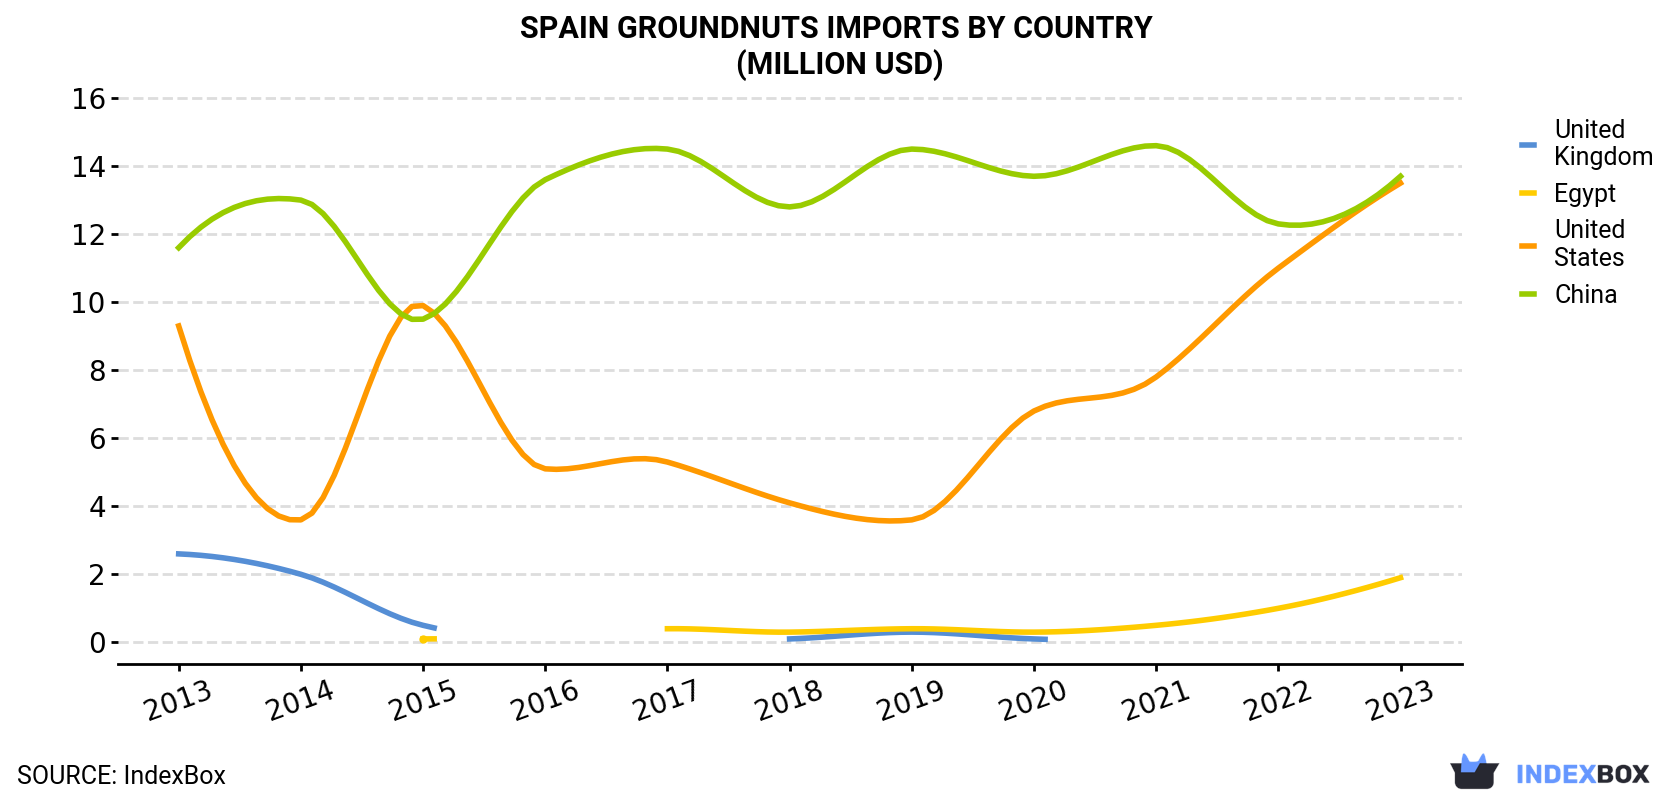 Spain Groundnuts Imports By Country (Million USD)